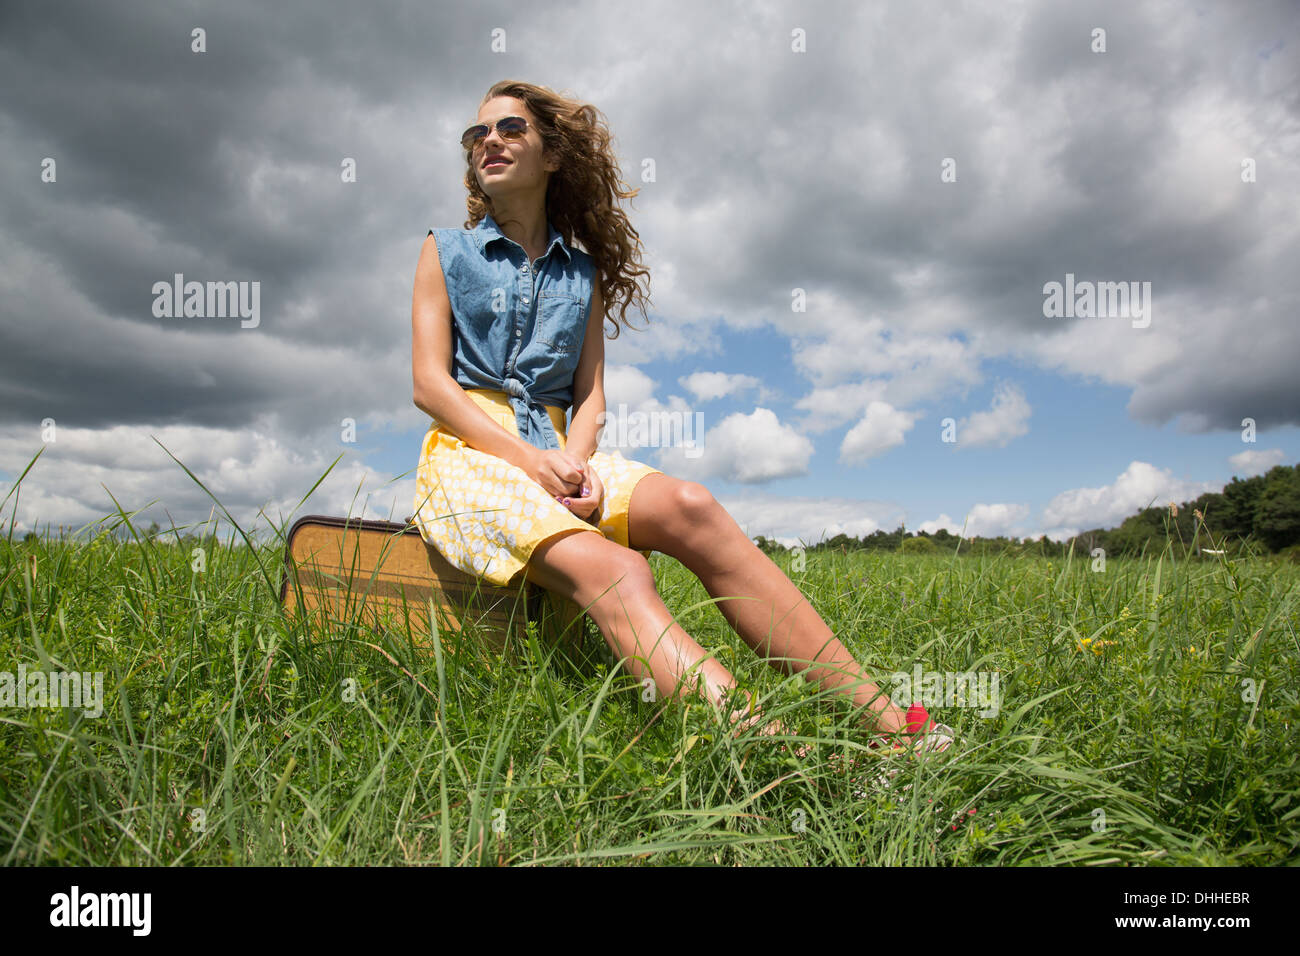 Teenage girl sitting on suitcase in field Banque D'Images